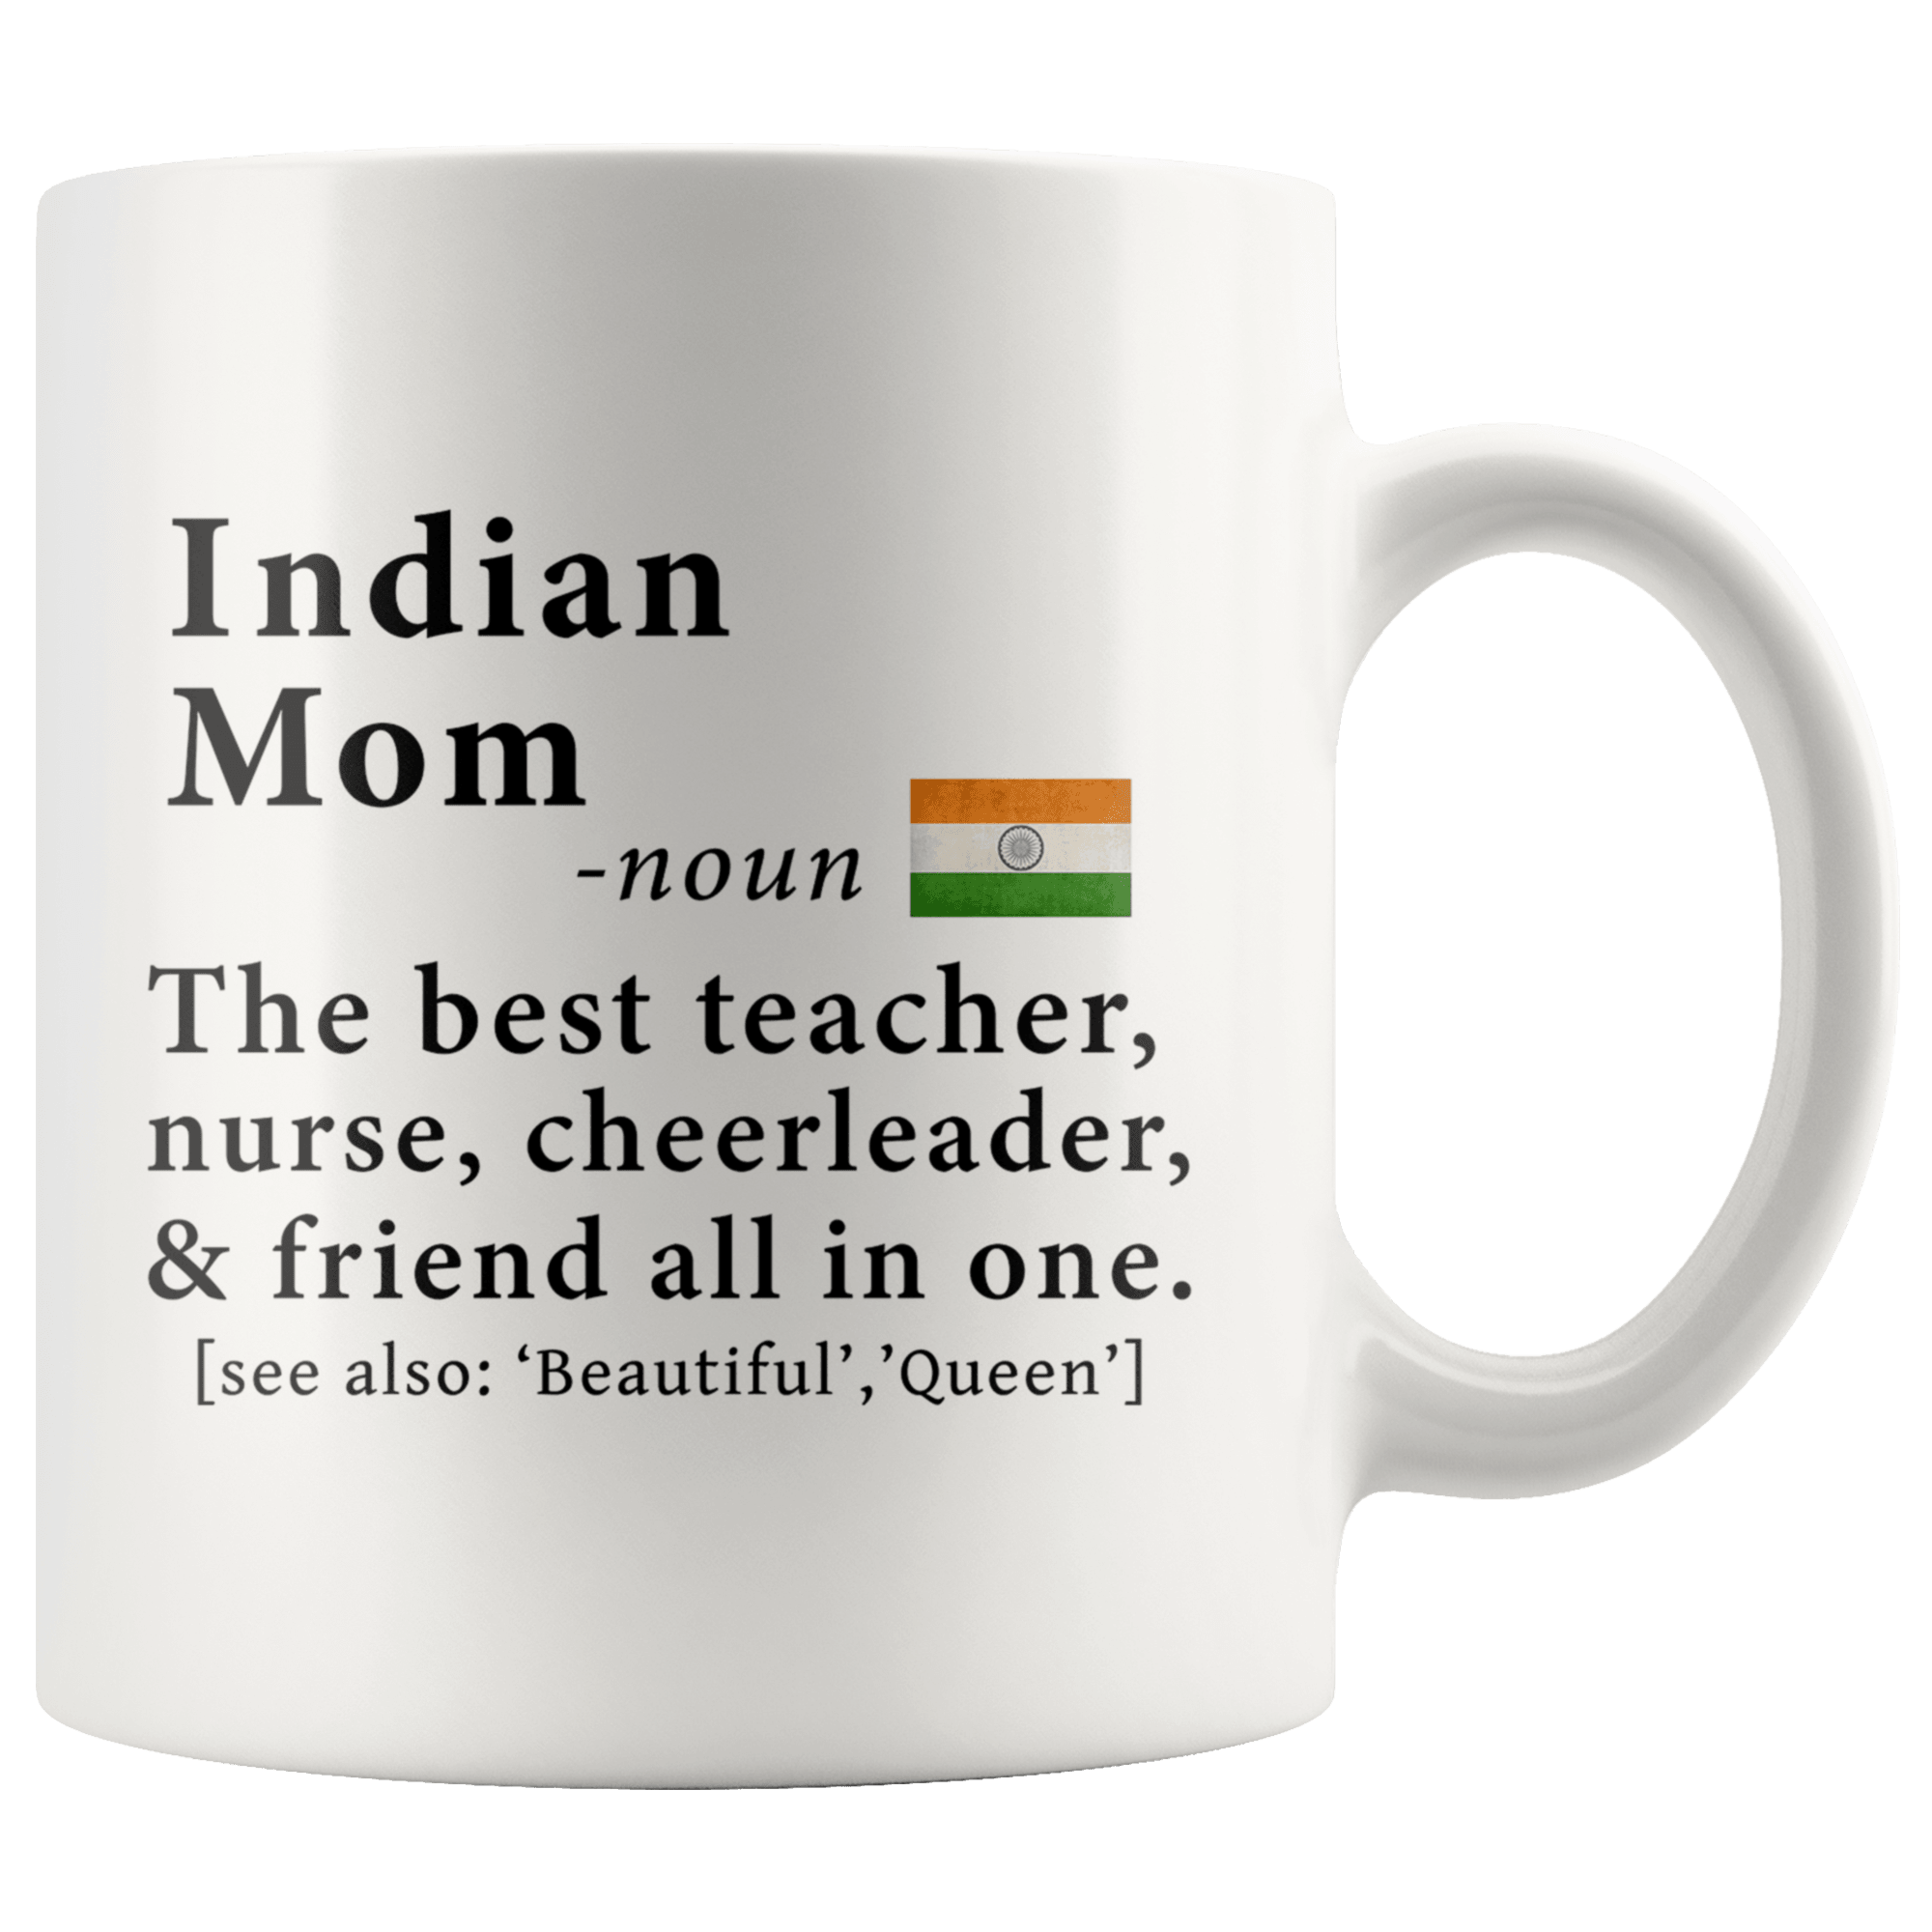 Buy Family Shoping Mothers Day Gift for Mom Indian Mom Coffee Mug with  Medal Award for Mom Combo Hamper Online at Low Prices in India - Amazon.in